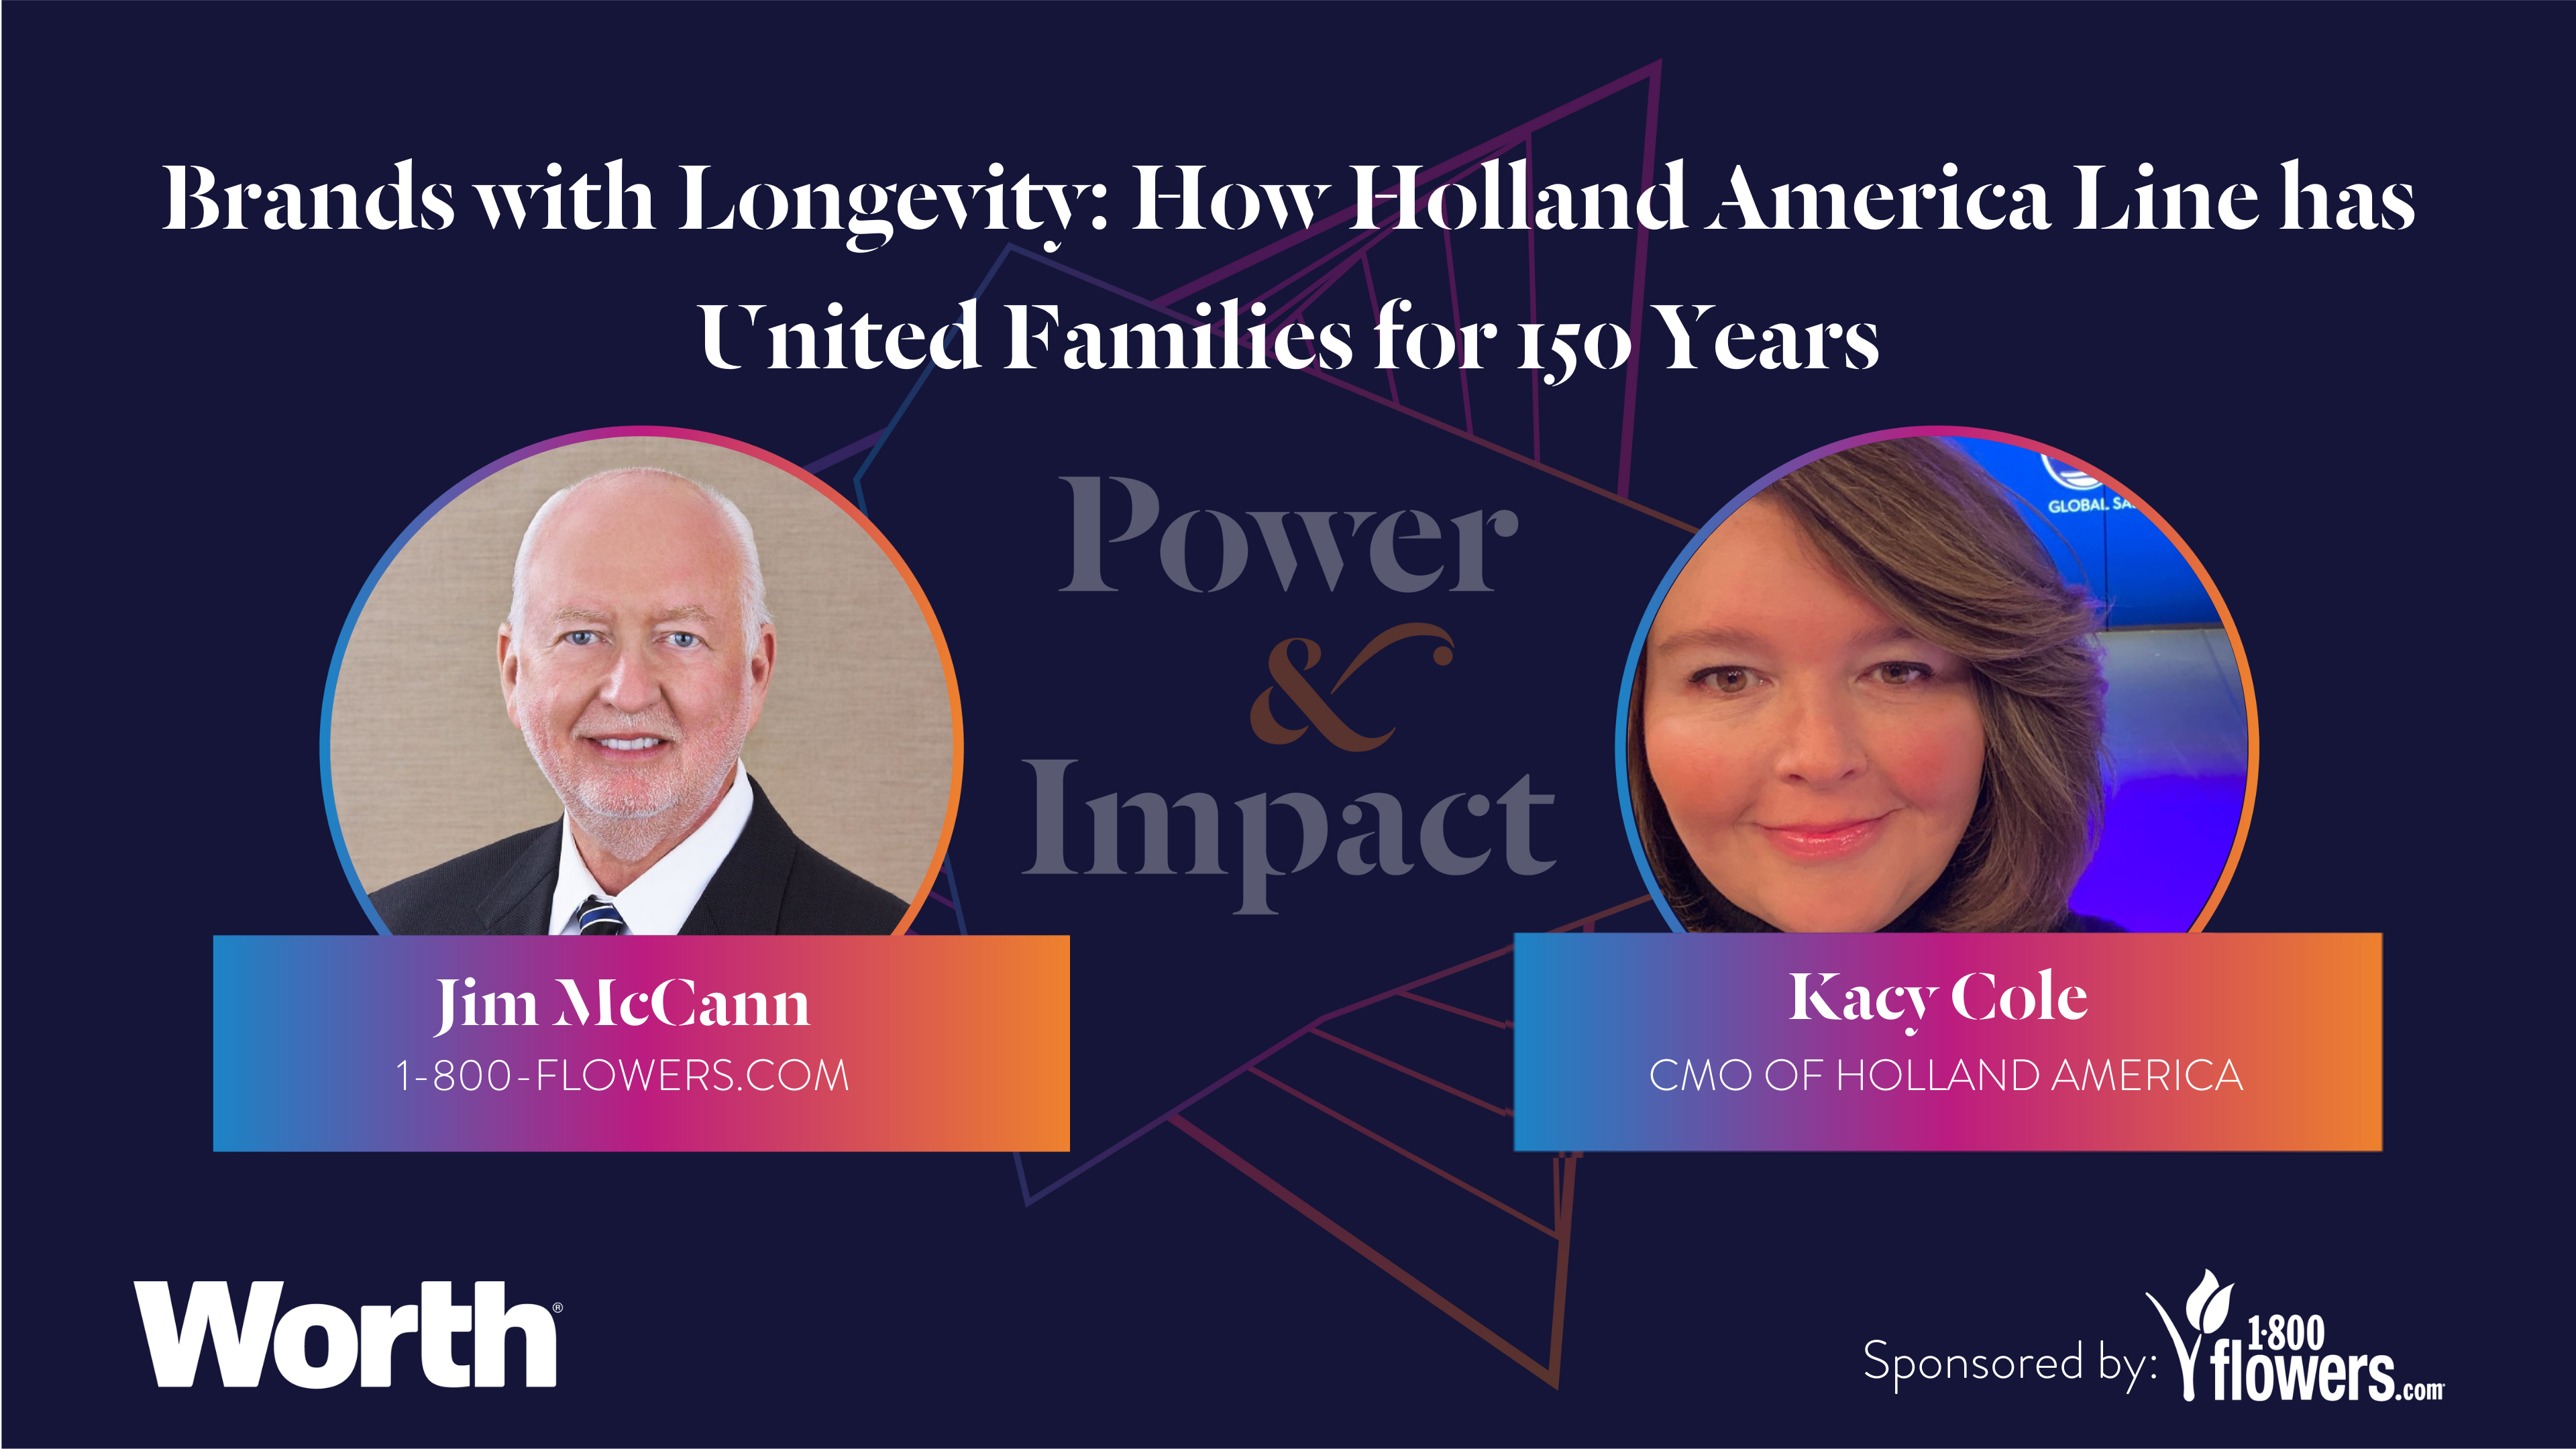 Brands with Longevity How Holland America Line has United Families for 150 Years